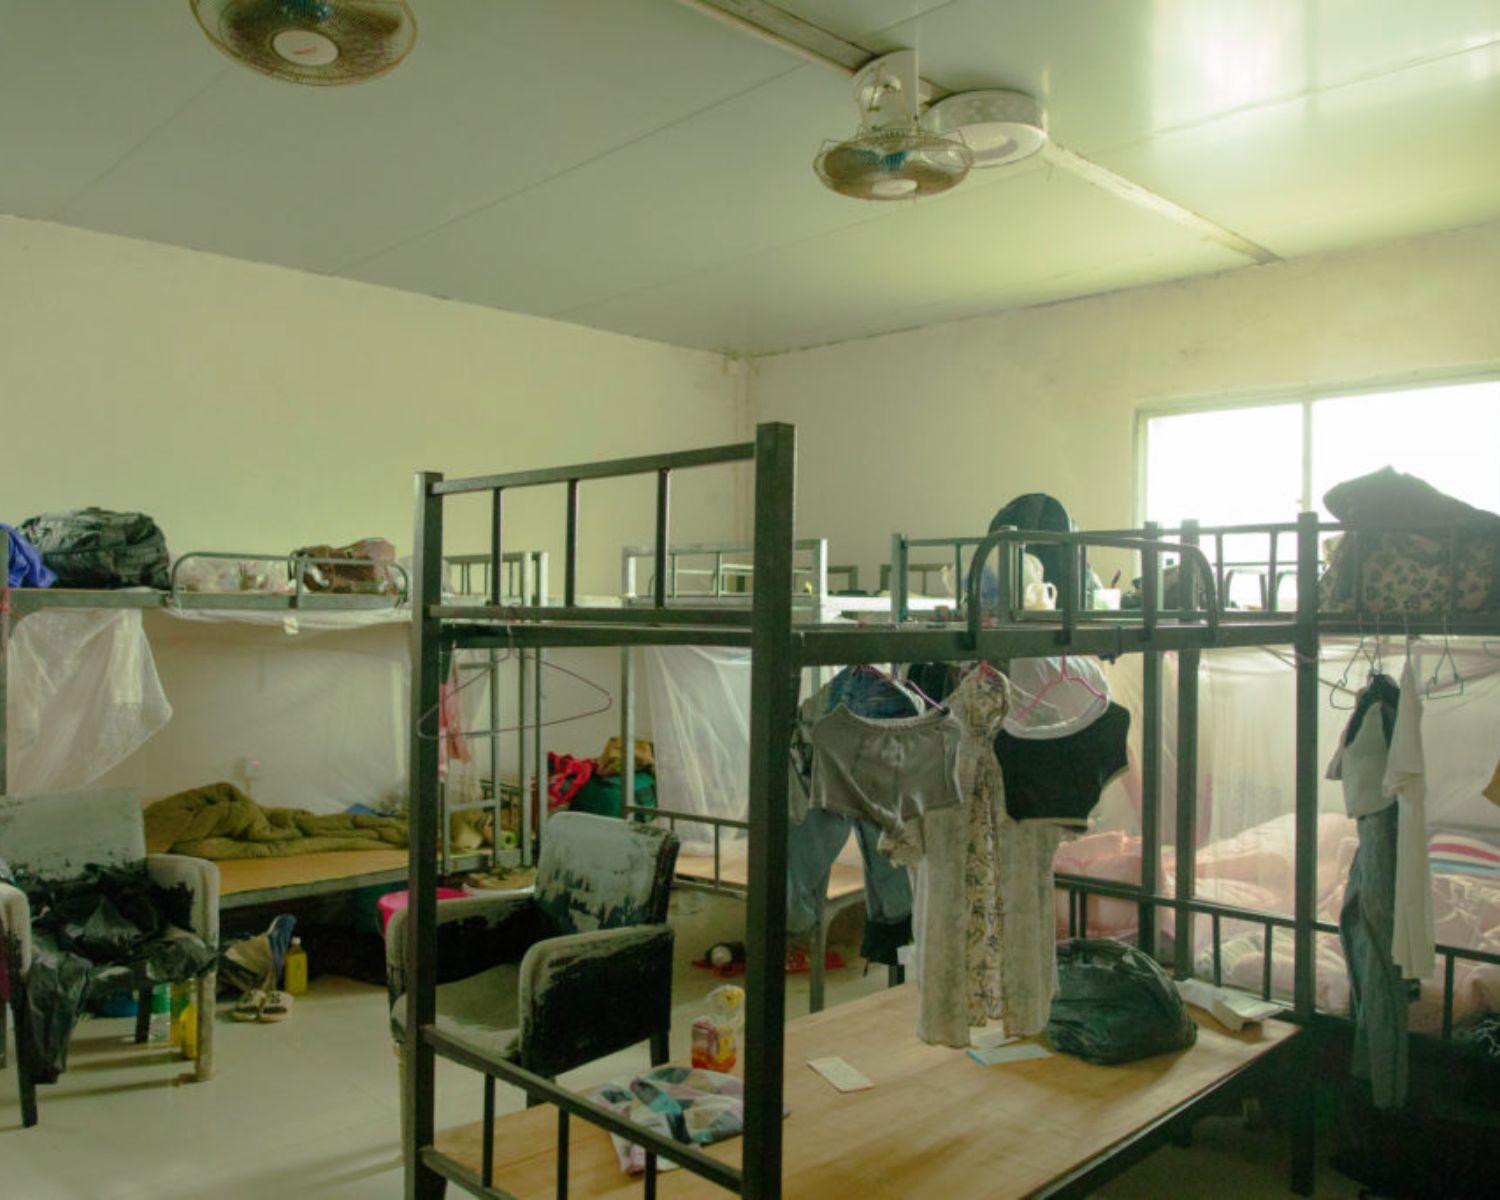 A dorm room scattered with women's clothes.